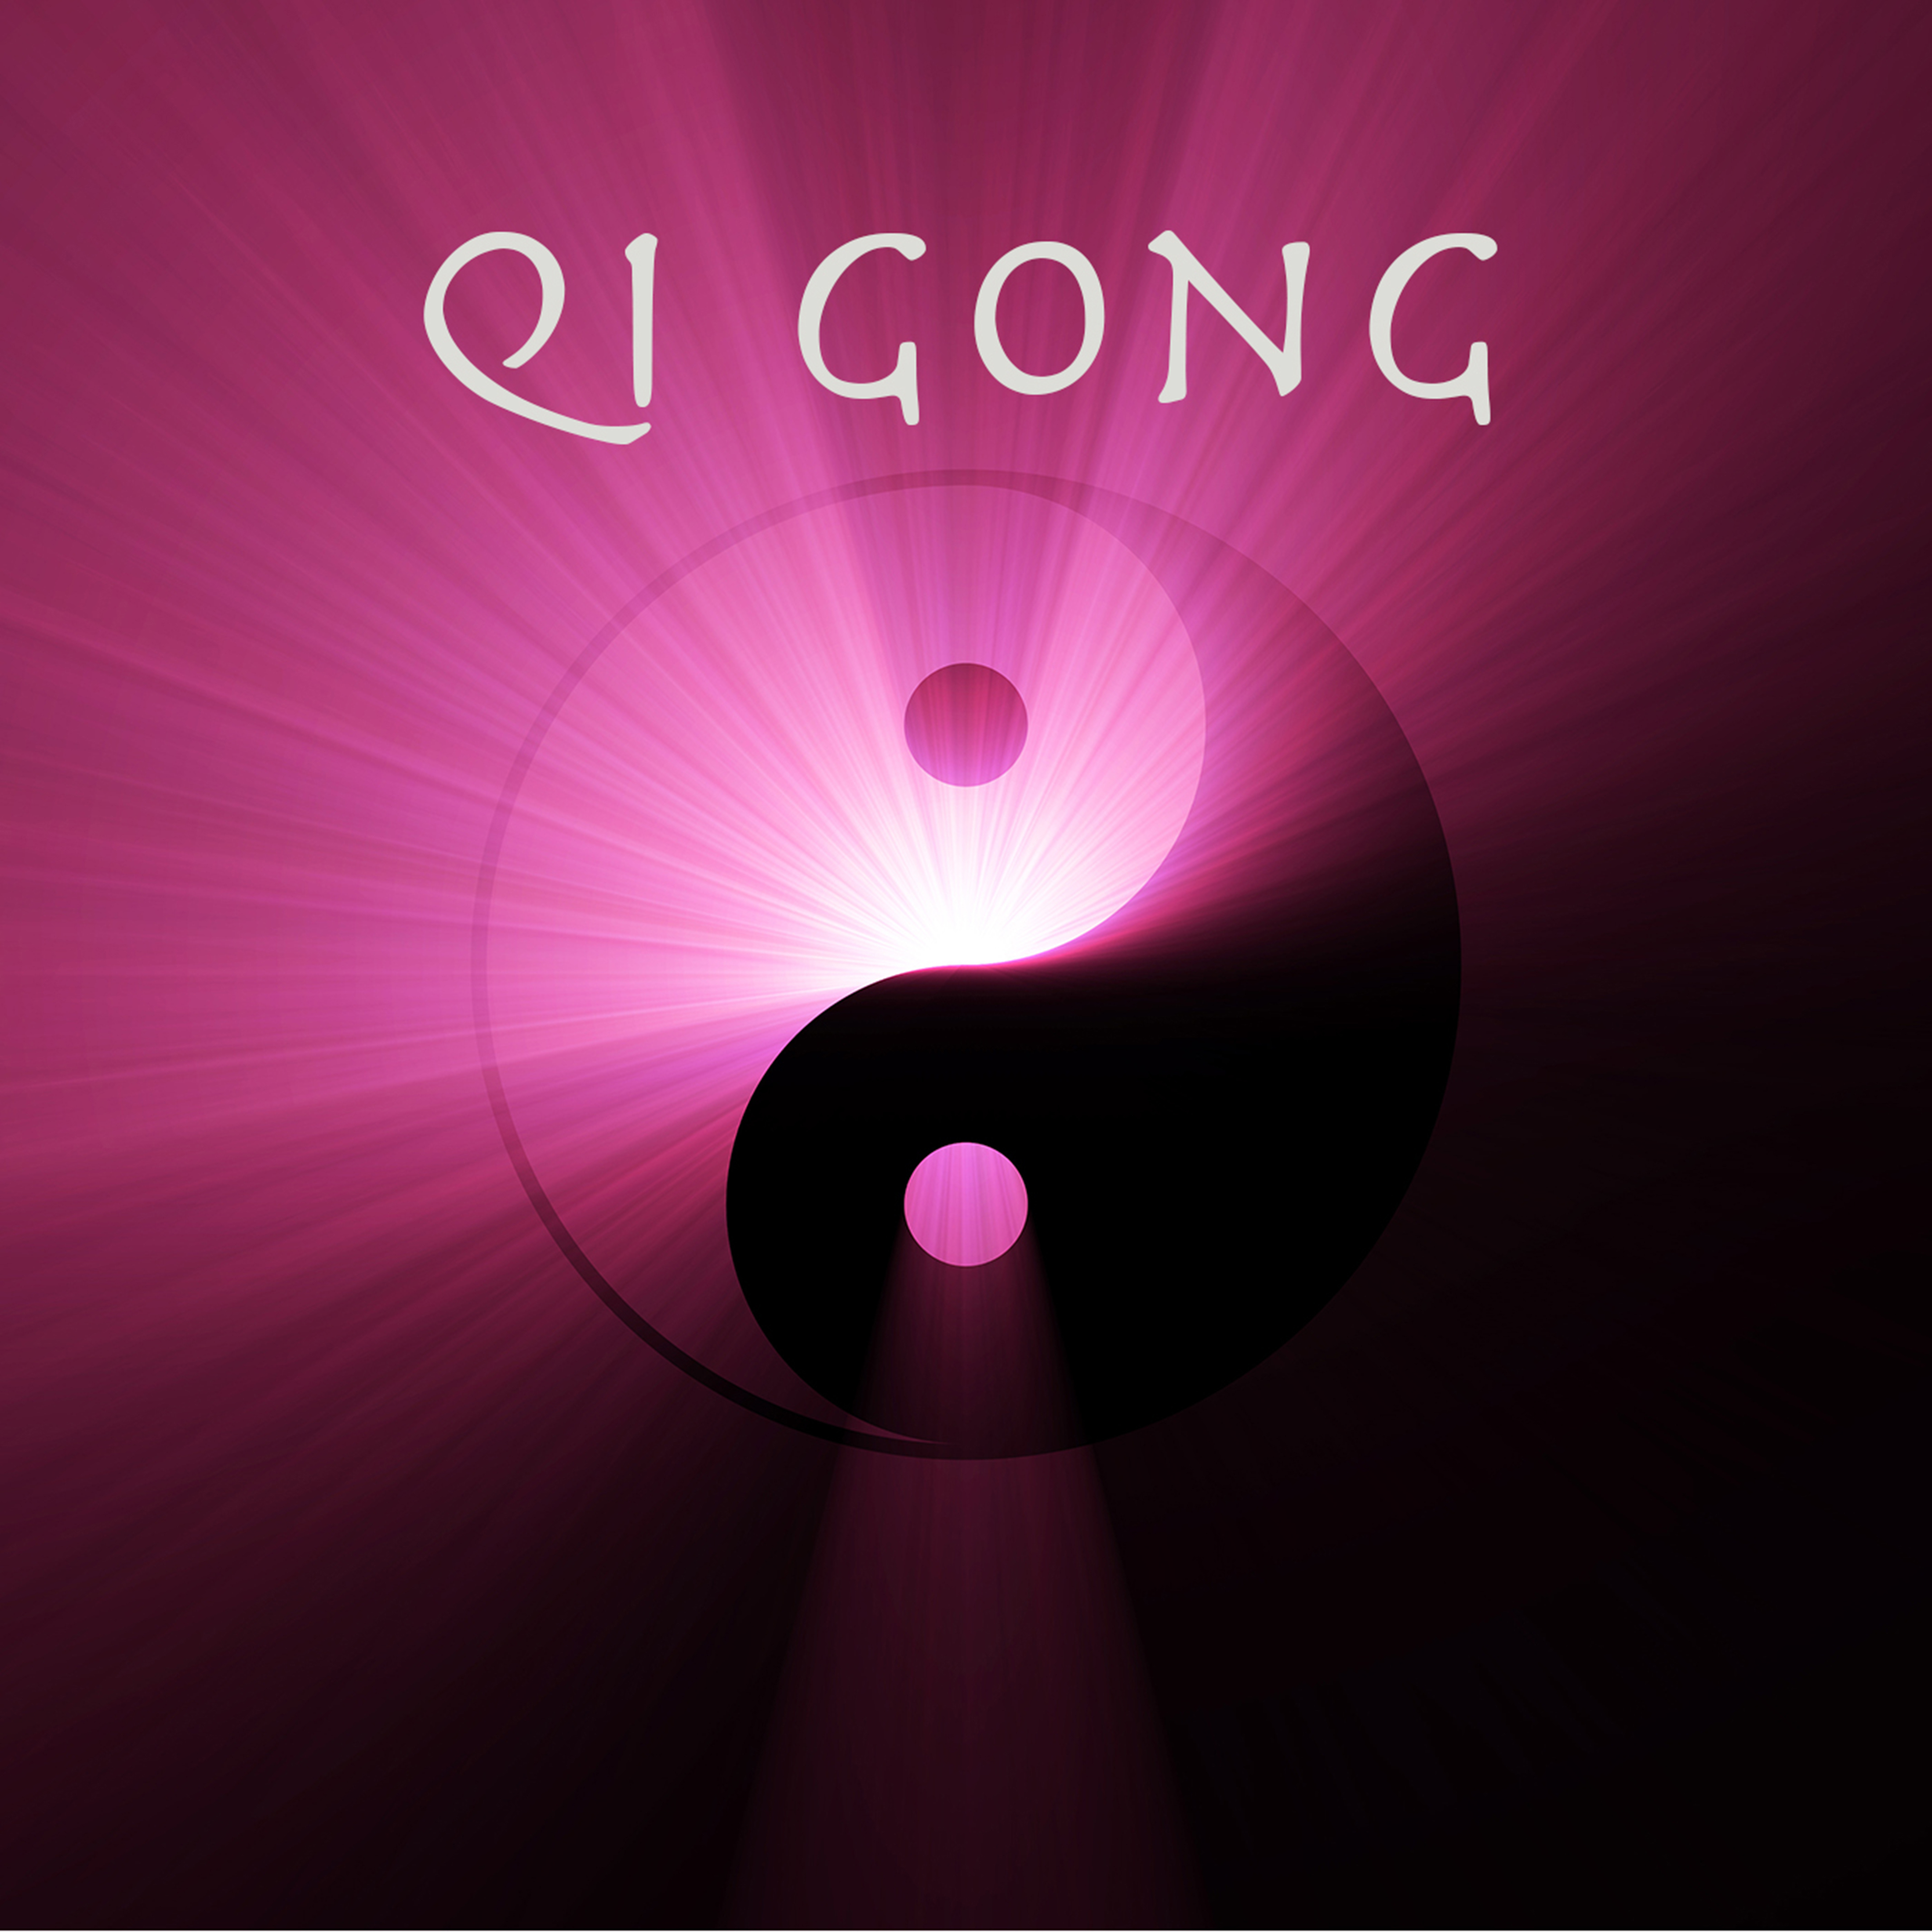 Qi Gong: Soothing Relaxing Sounds for Qigong Exercises, Yoga, Reiki and Tai Chi, Meditation and Mind Body Connection